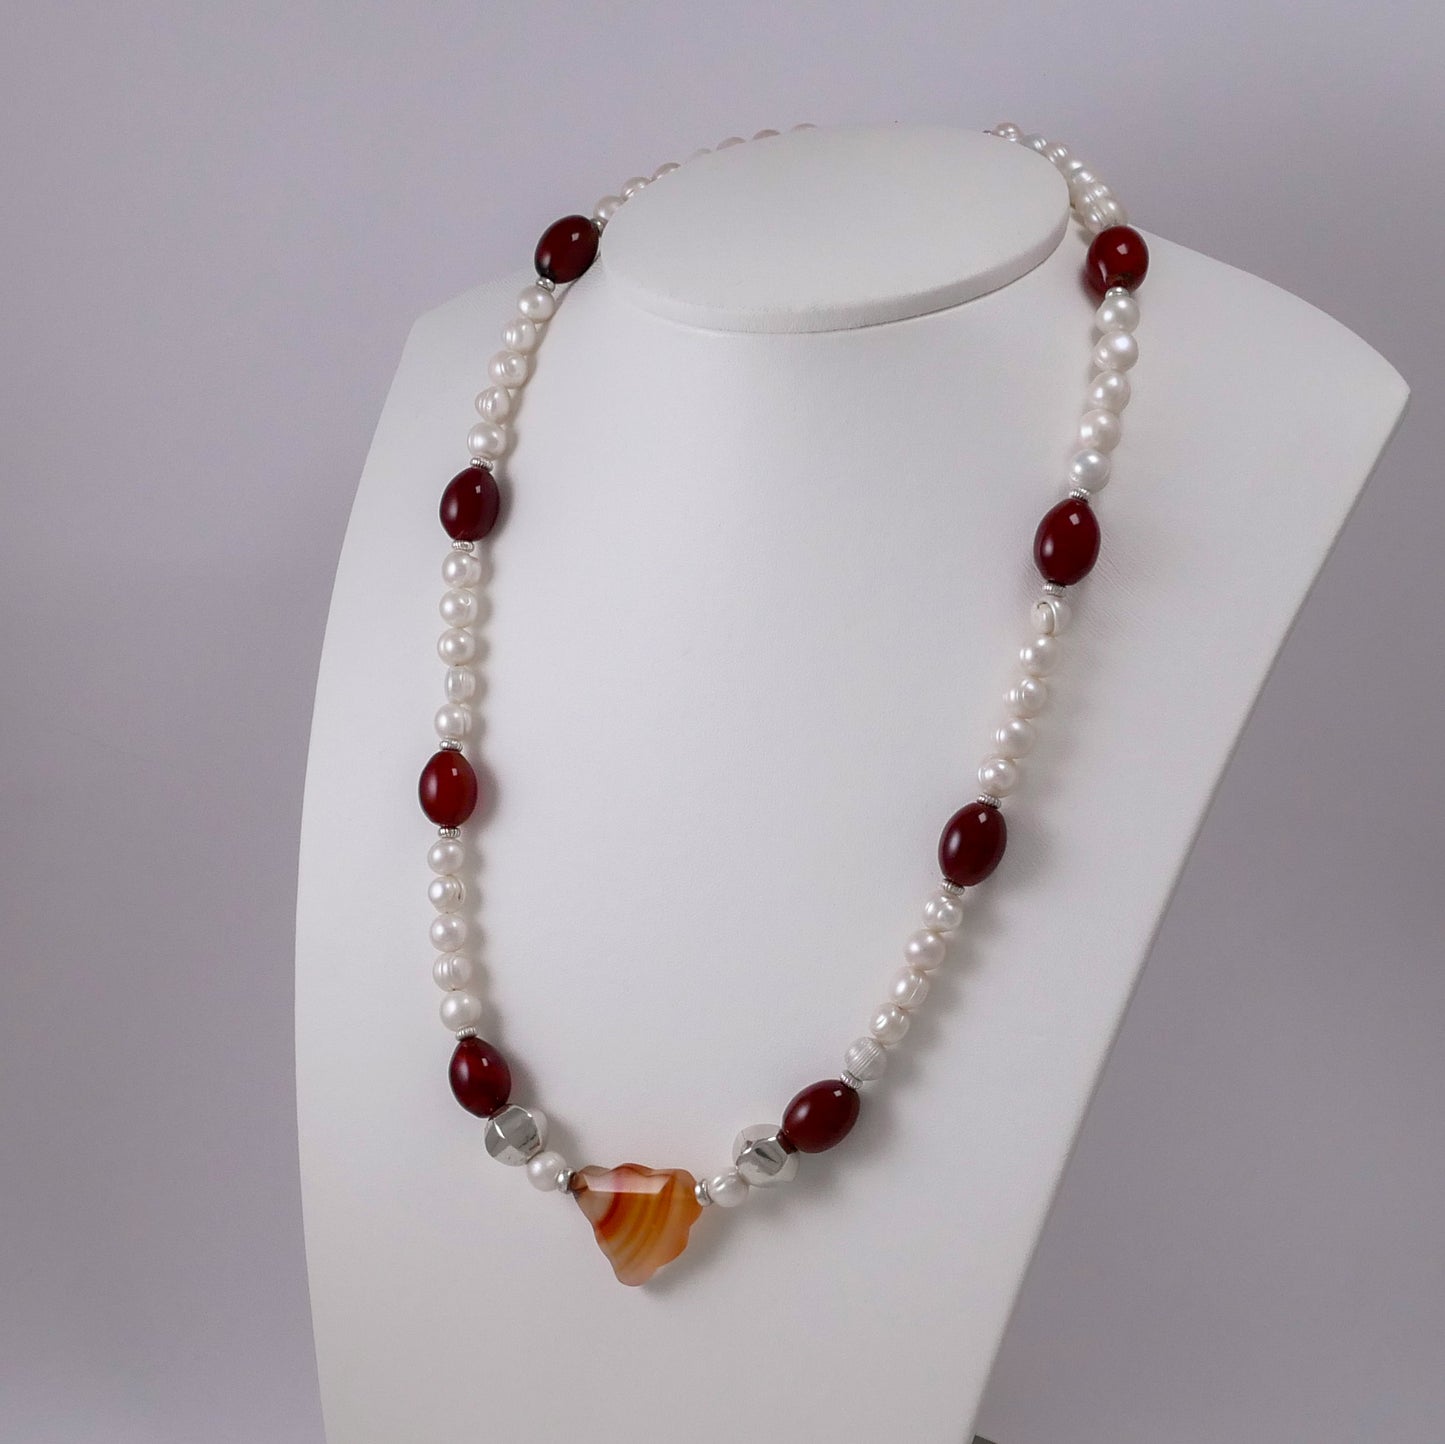 Pearls, Carnelians, Agates, and Sterling Silver Necklace - Katerina Roukouna